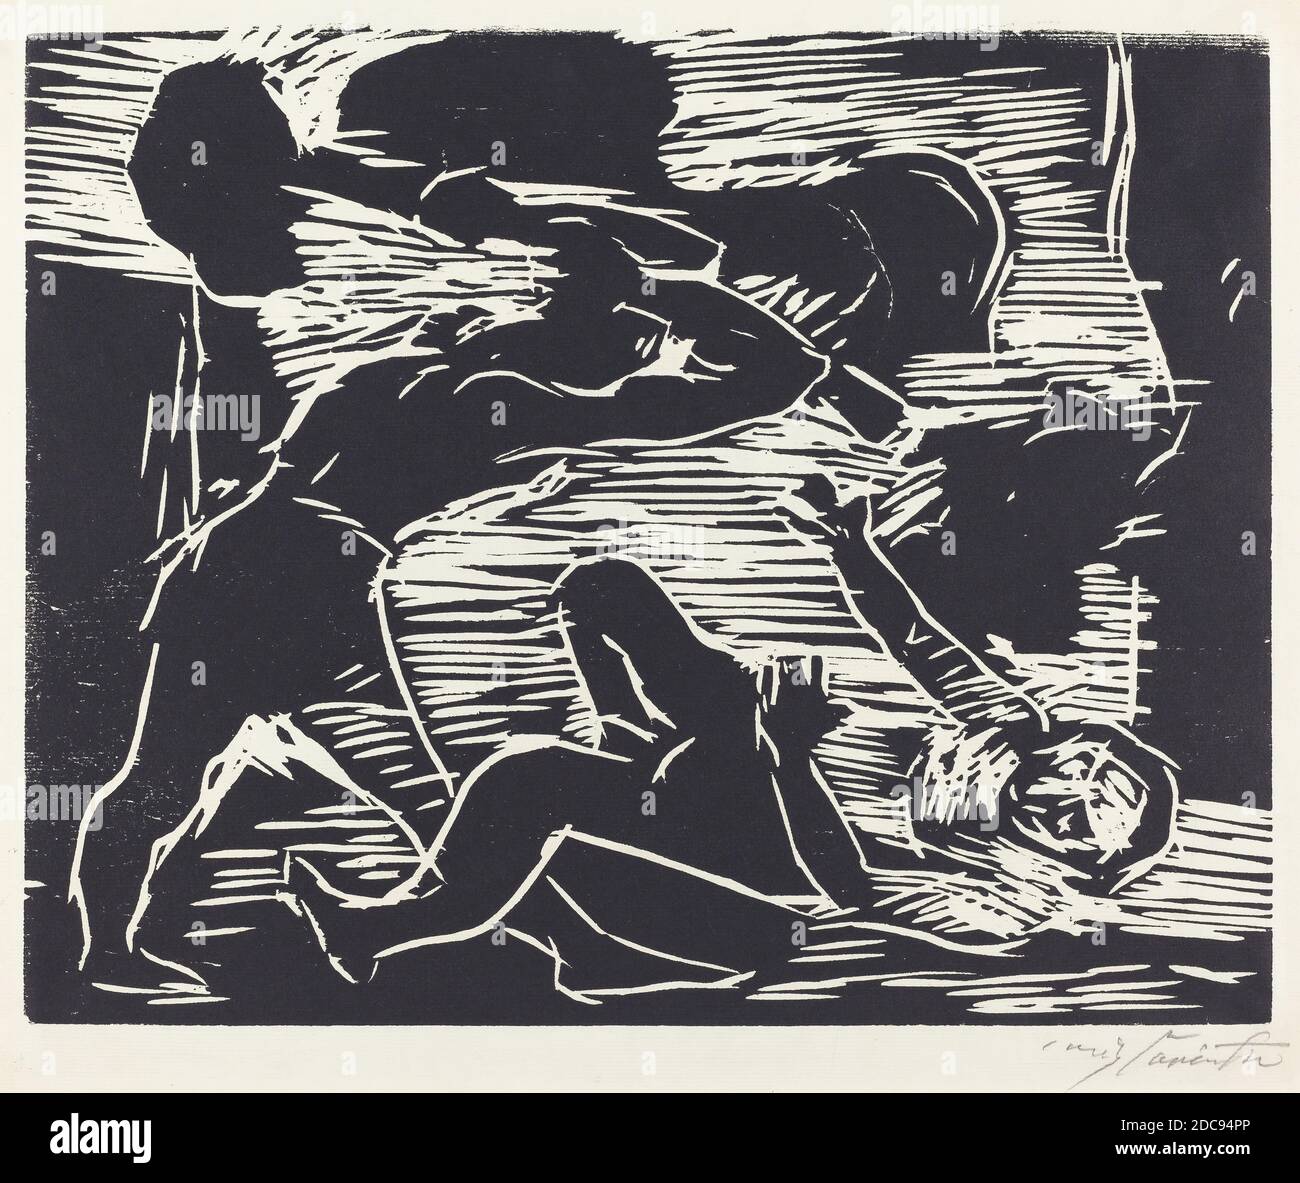 Lovis Corinth, (artist), German, 1858 - 1925, Brudermord (Cain and Abel), 1919, woodcut in black, image: 31.9 x 40.1 cm (12 9/16 x 15 13/16 in.), sheet: 37.6 x 48.2 cm (14 13/16 x 19 in Stock Photo